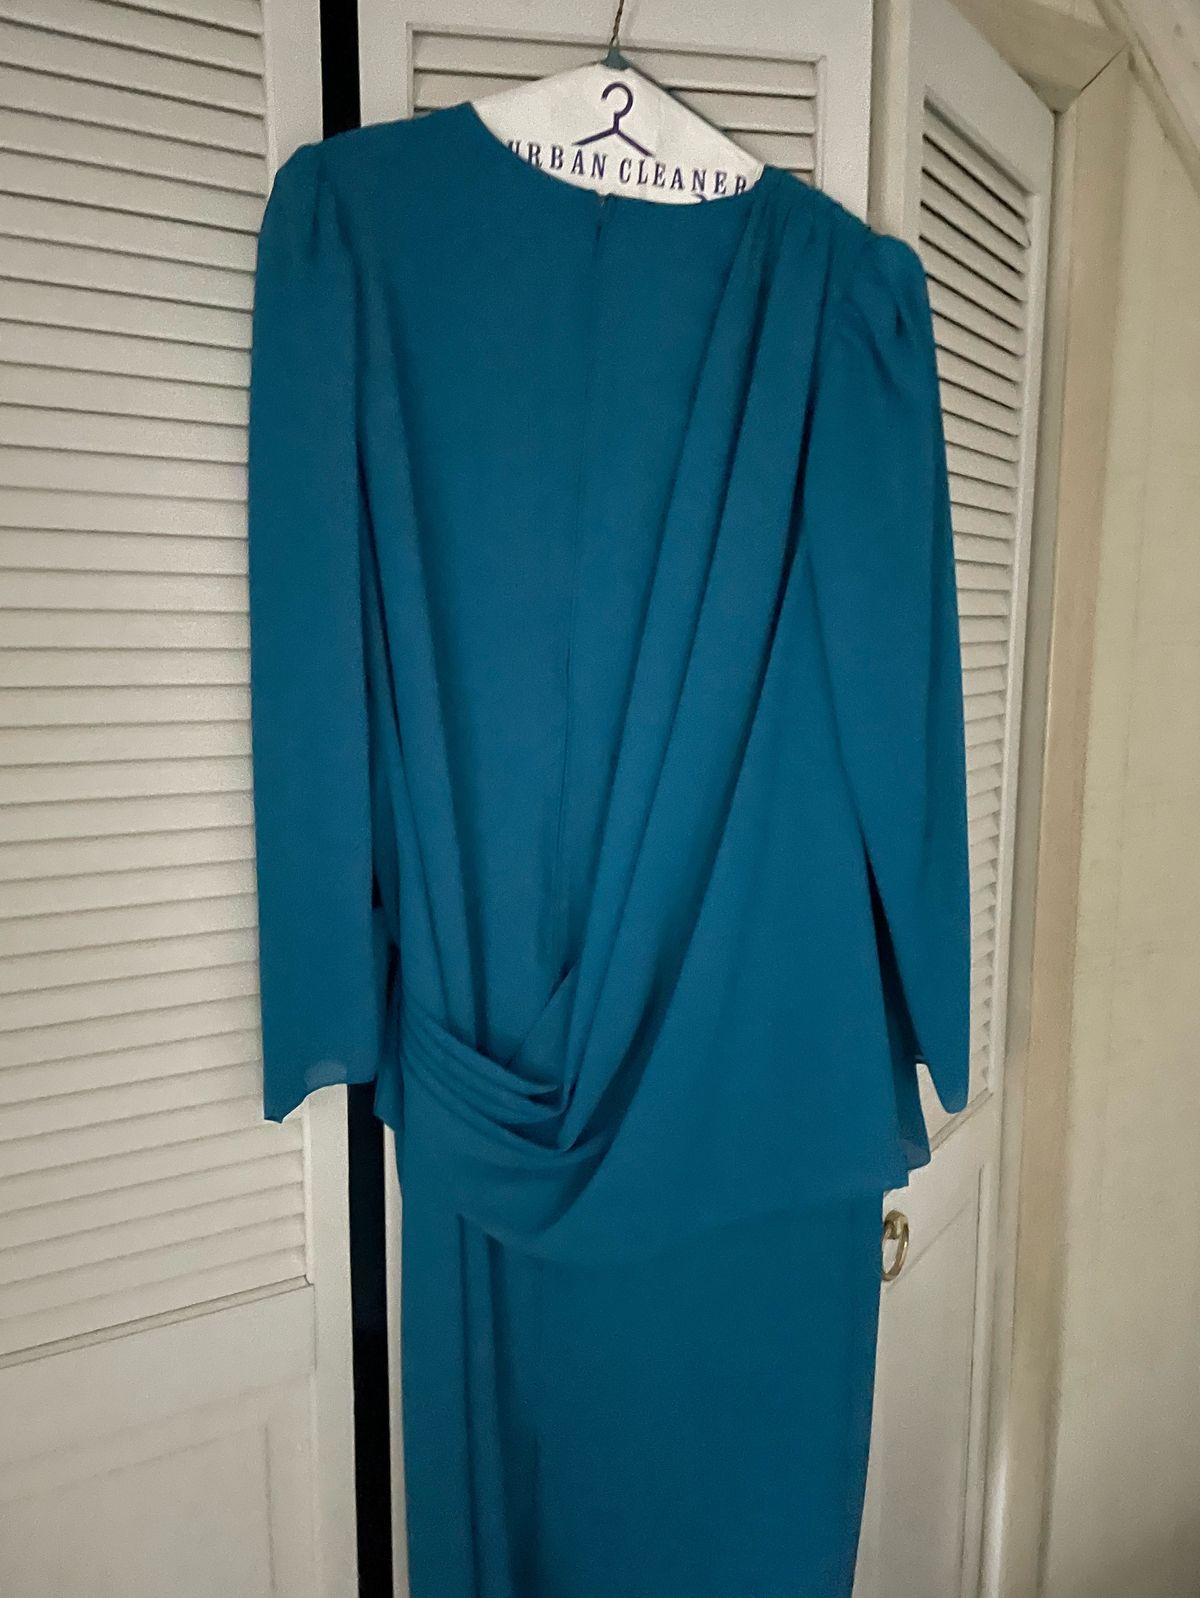 Plus Size 16 Nightclub Long Sleeve Turquoise Blue Cocktail Dress on Queenly